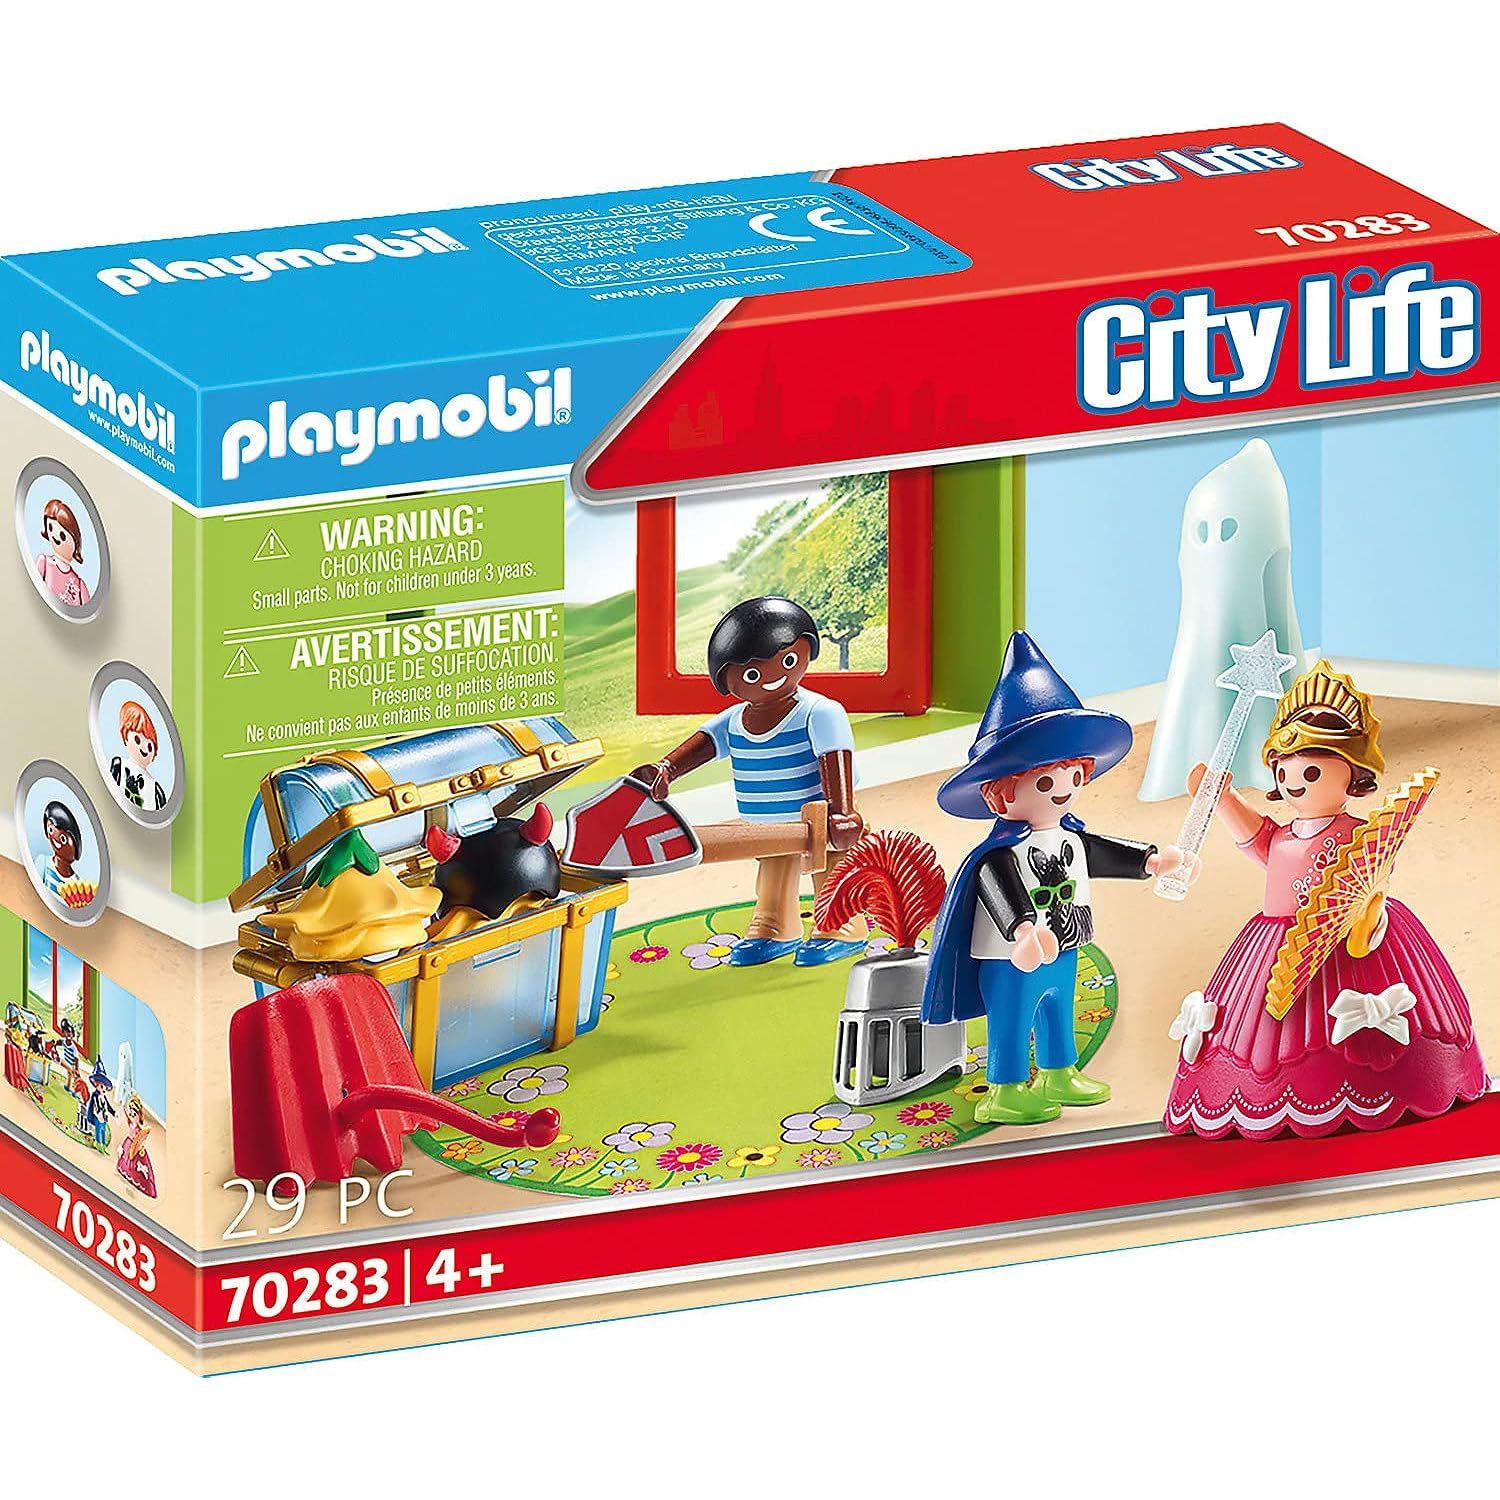 Playmobil Children with Costumes - $34.99